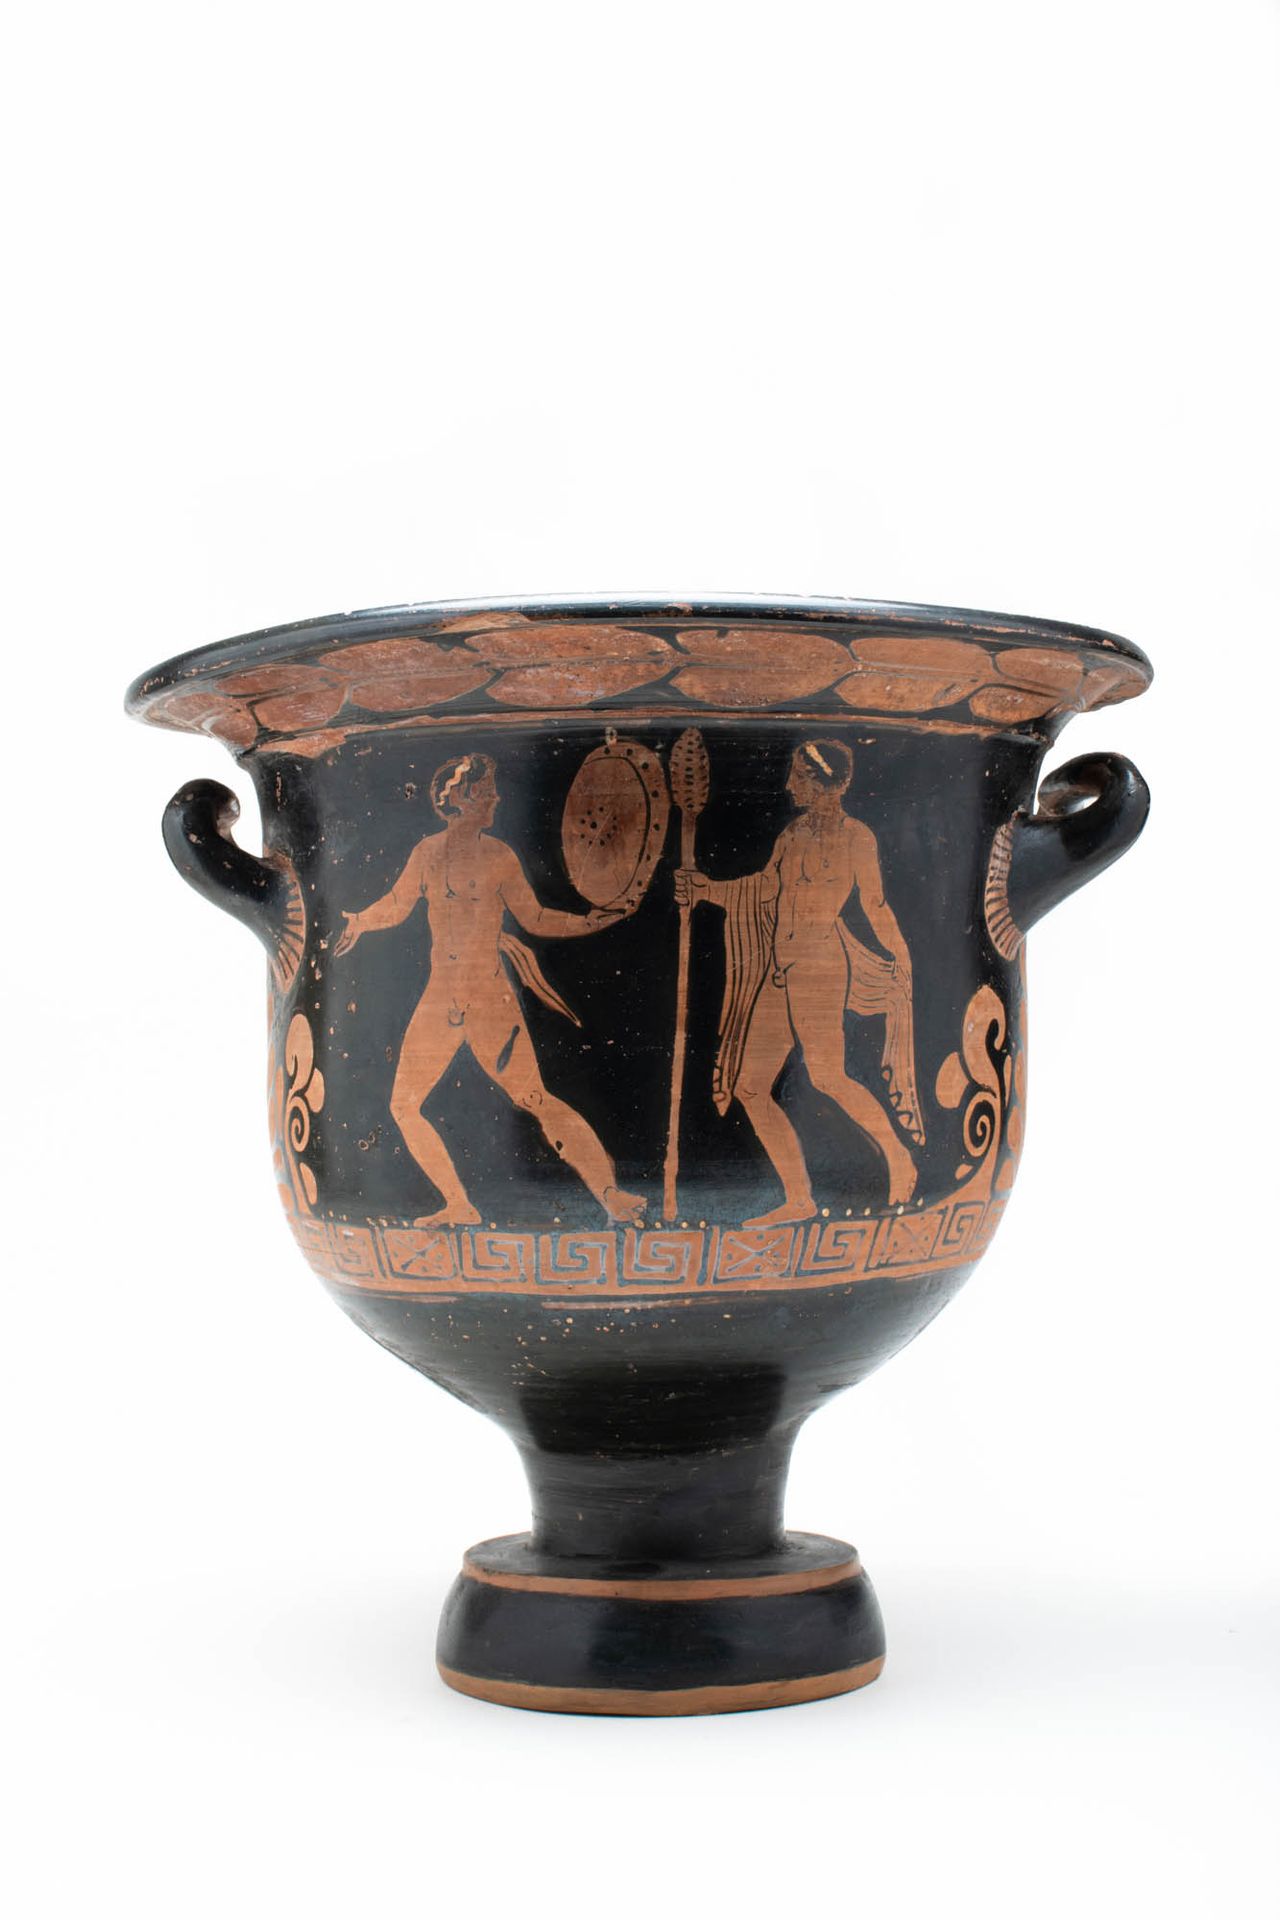 APULIAN RED-FIGURE BELL KRATER WITH SATYR AND DIONYSUS Ca. 390 V. CHR.
Glockenkr&hellip;